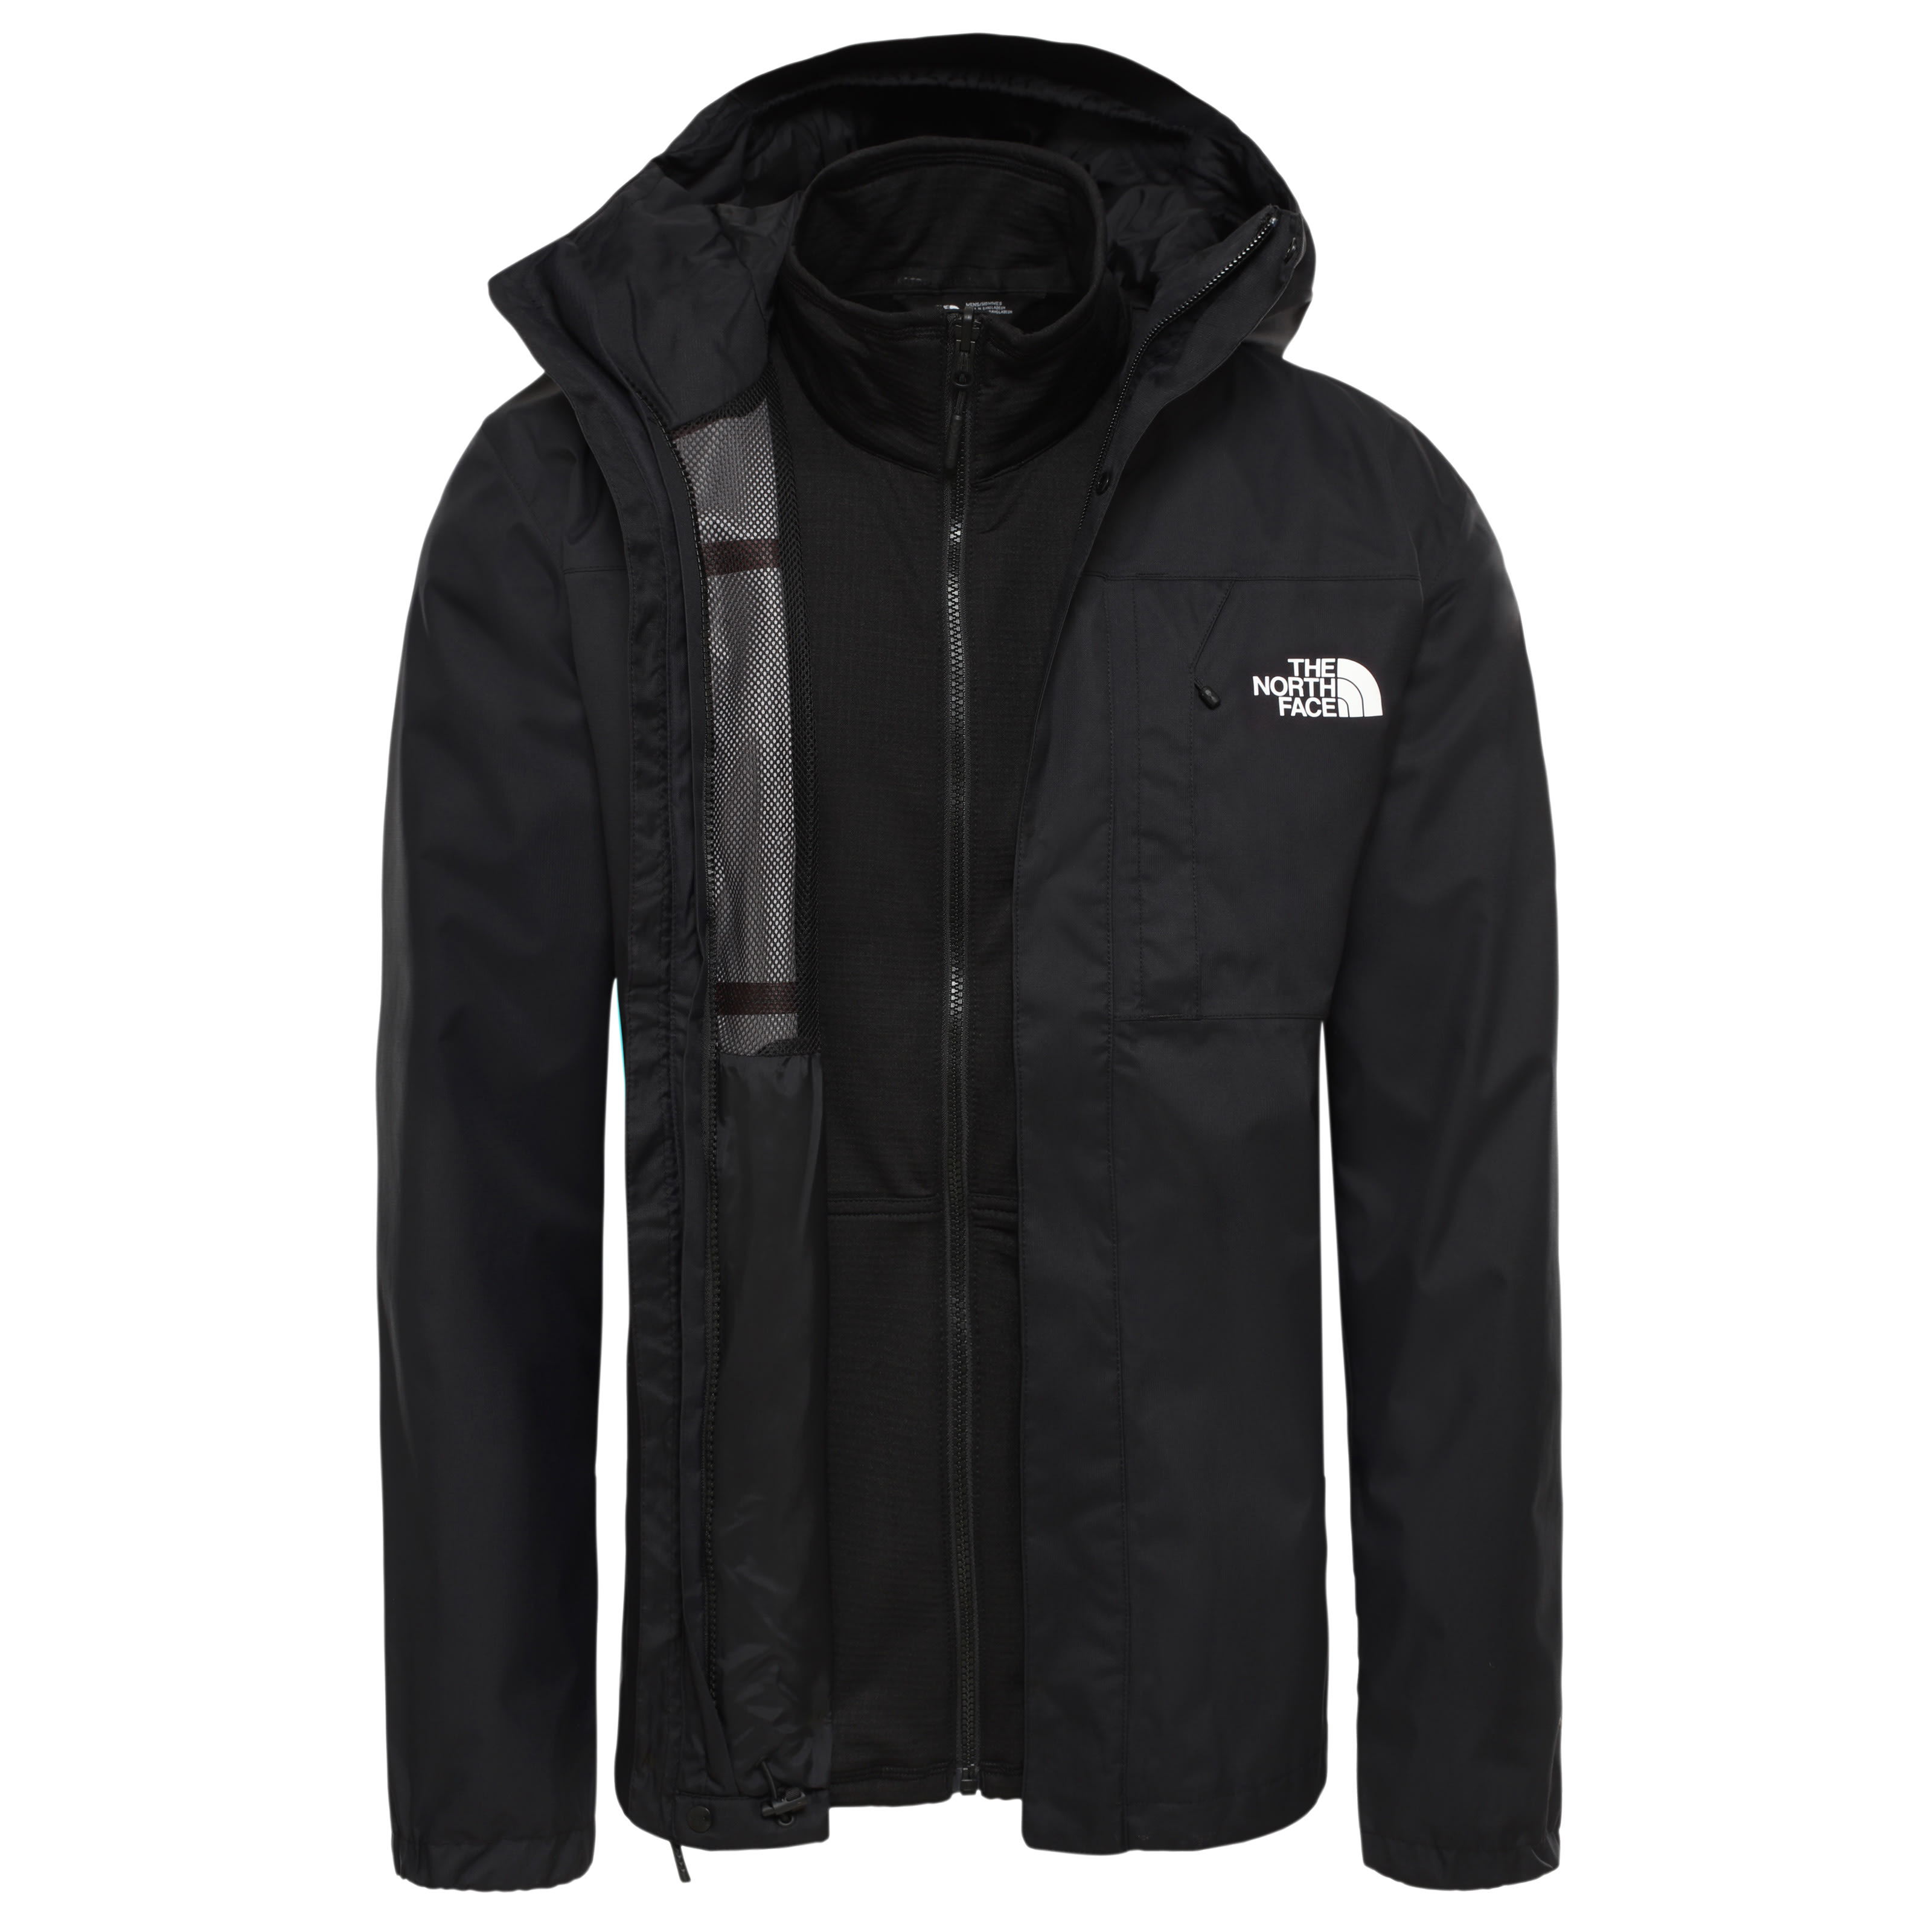 Kauf The North Face Men's Quest Triclimate Jacket bei Outnorth